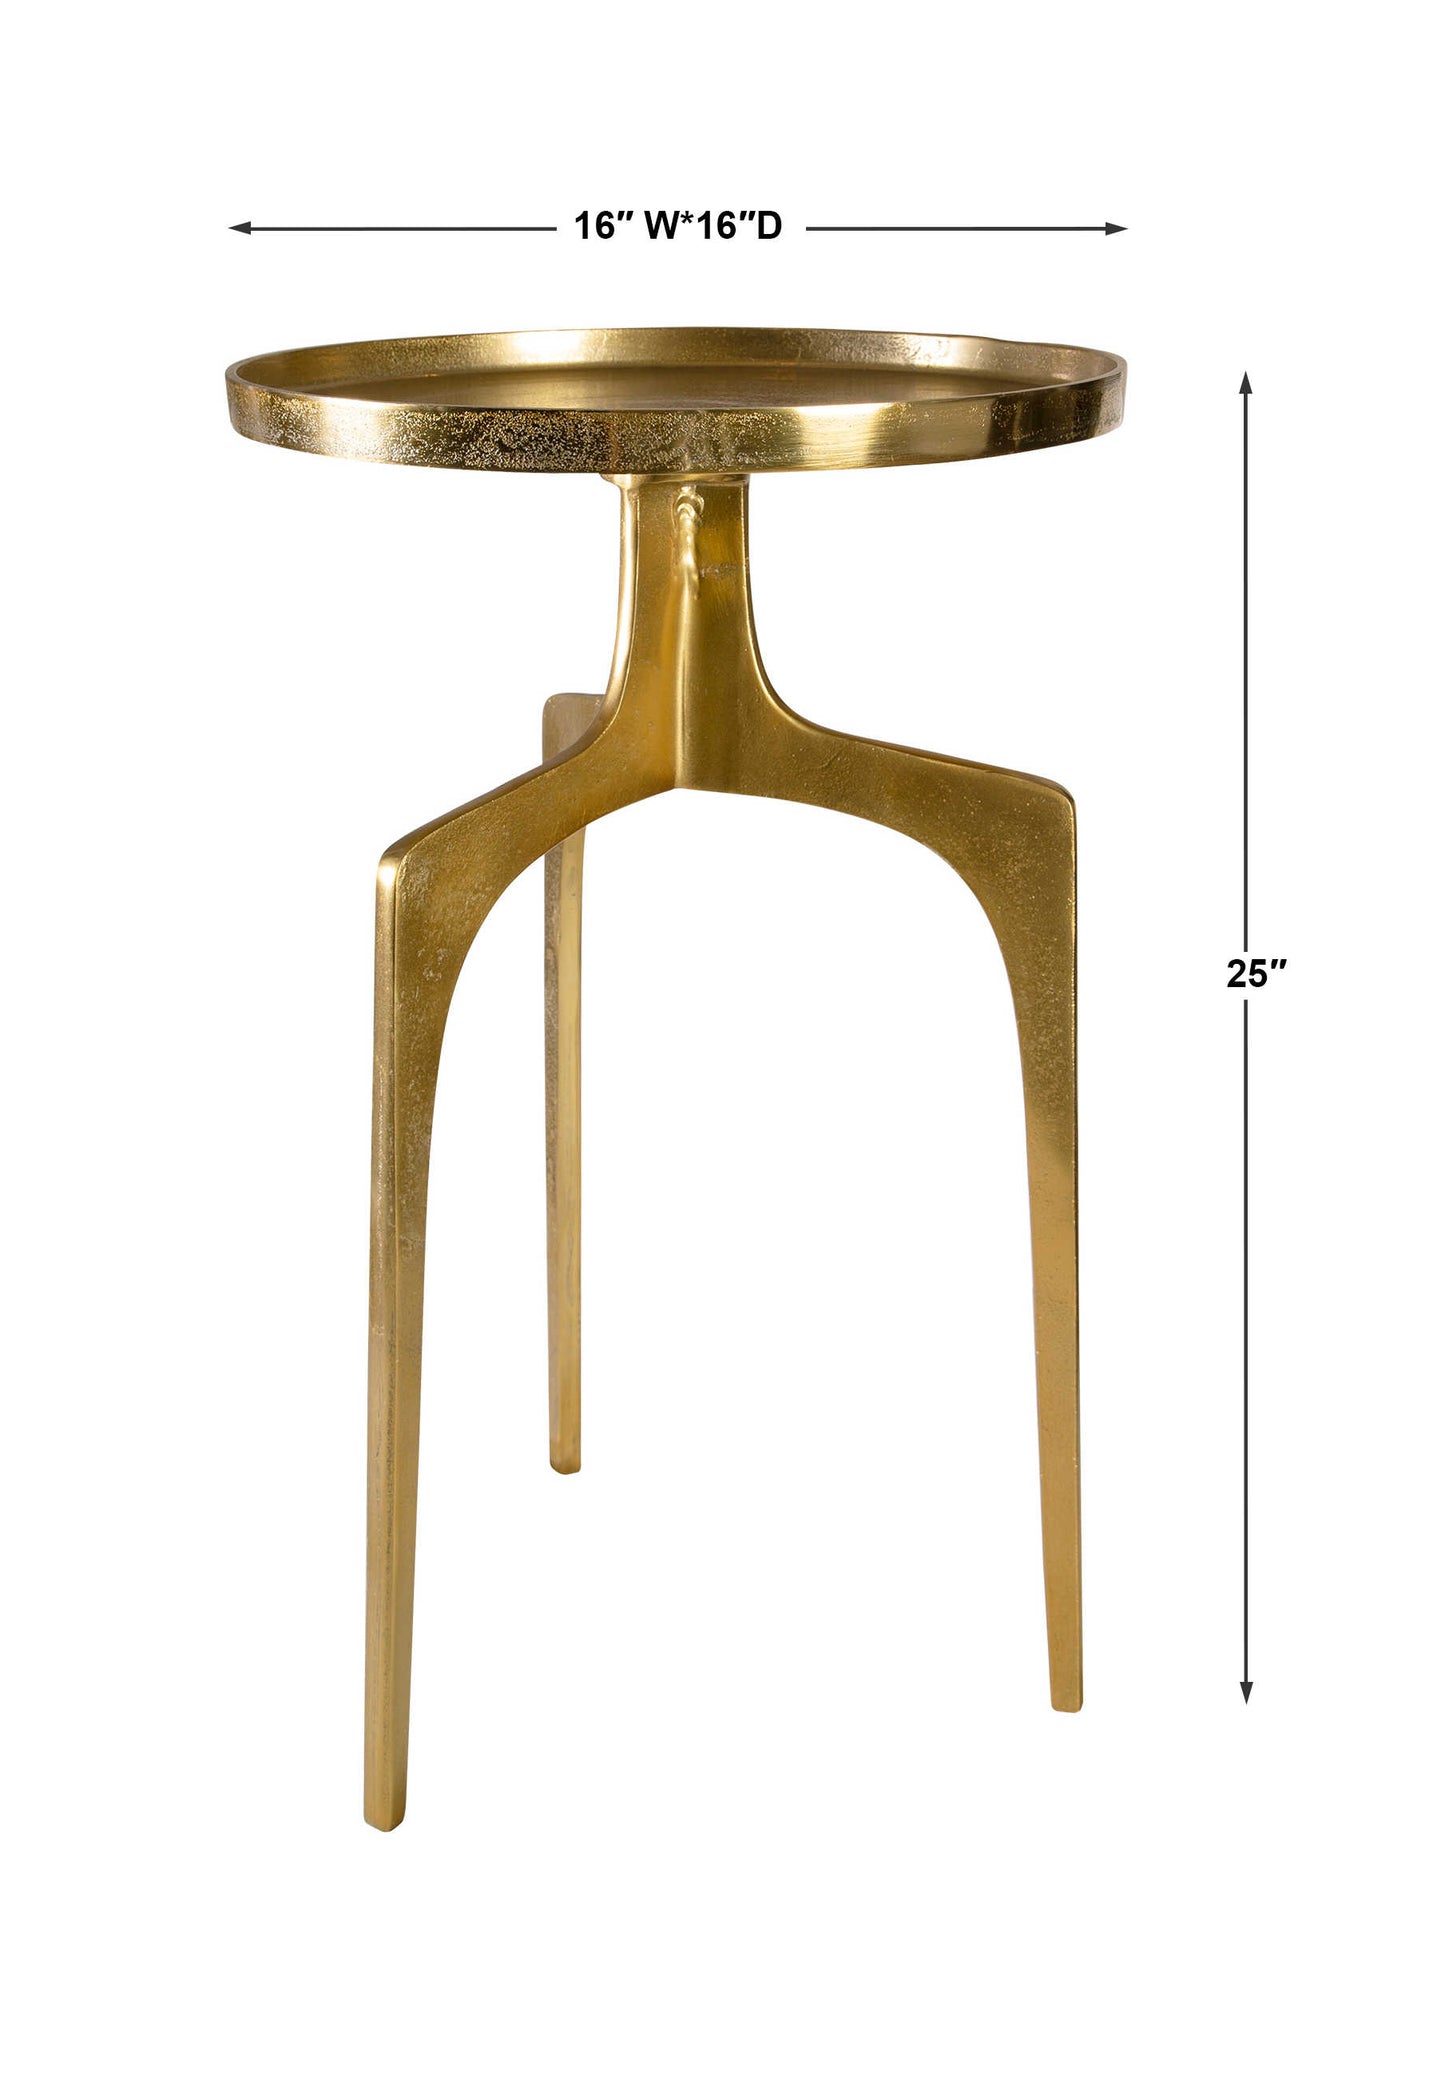 KENNA ACCENT TABLE, GOLD